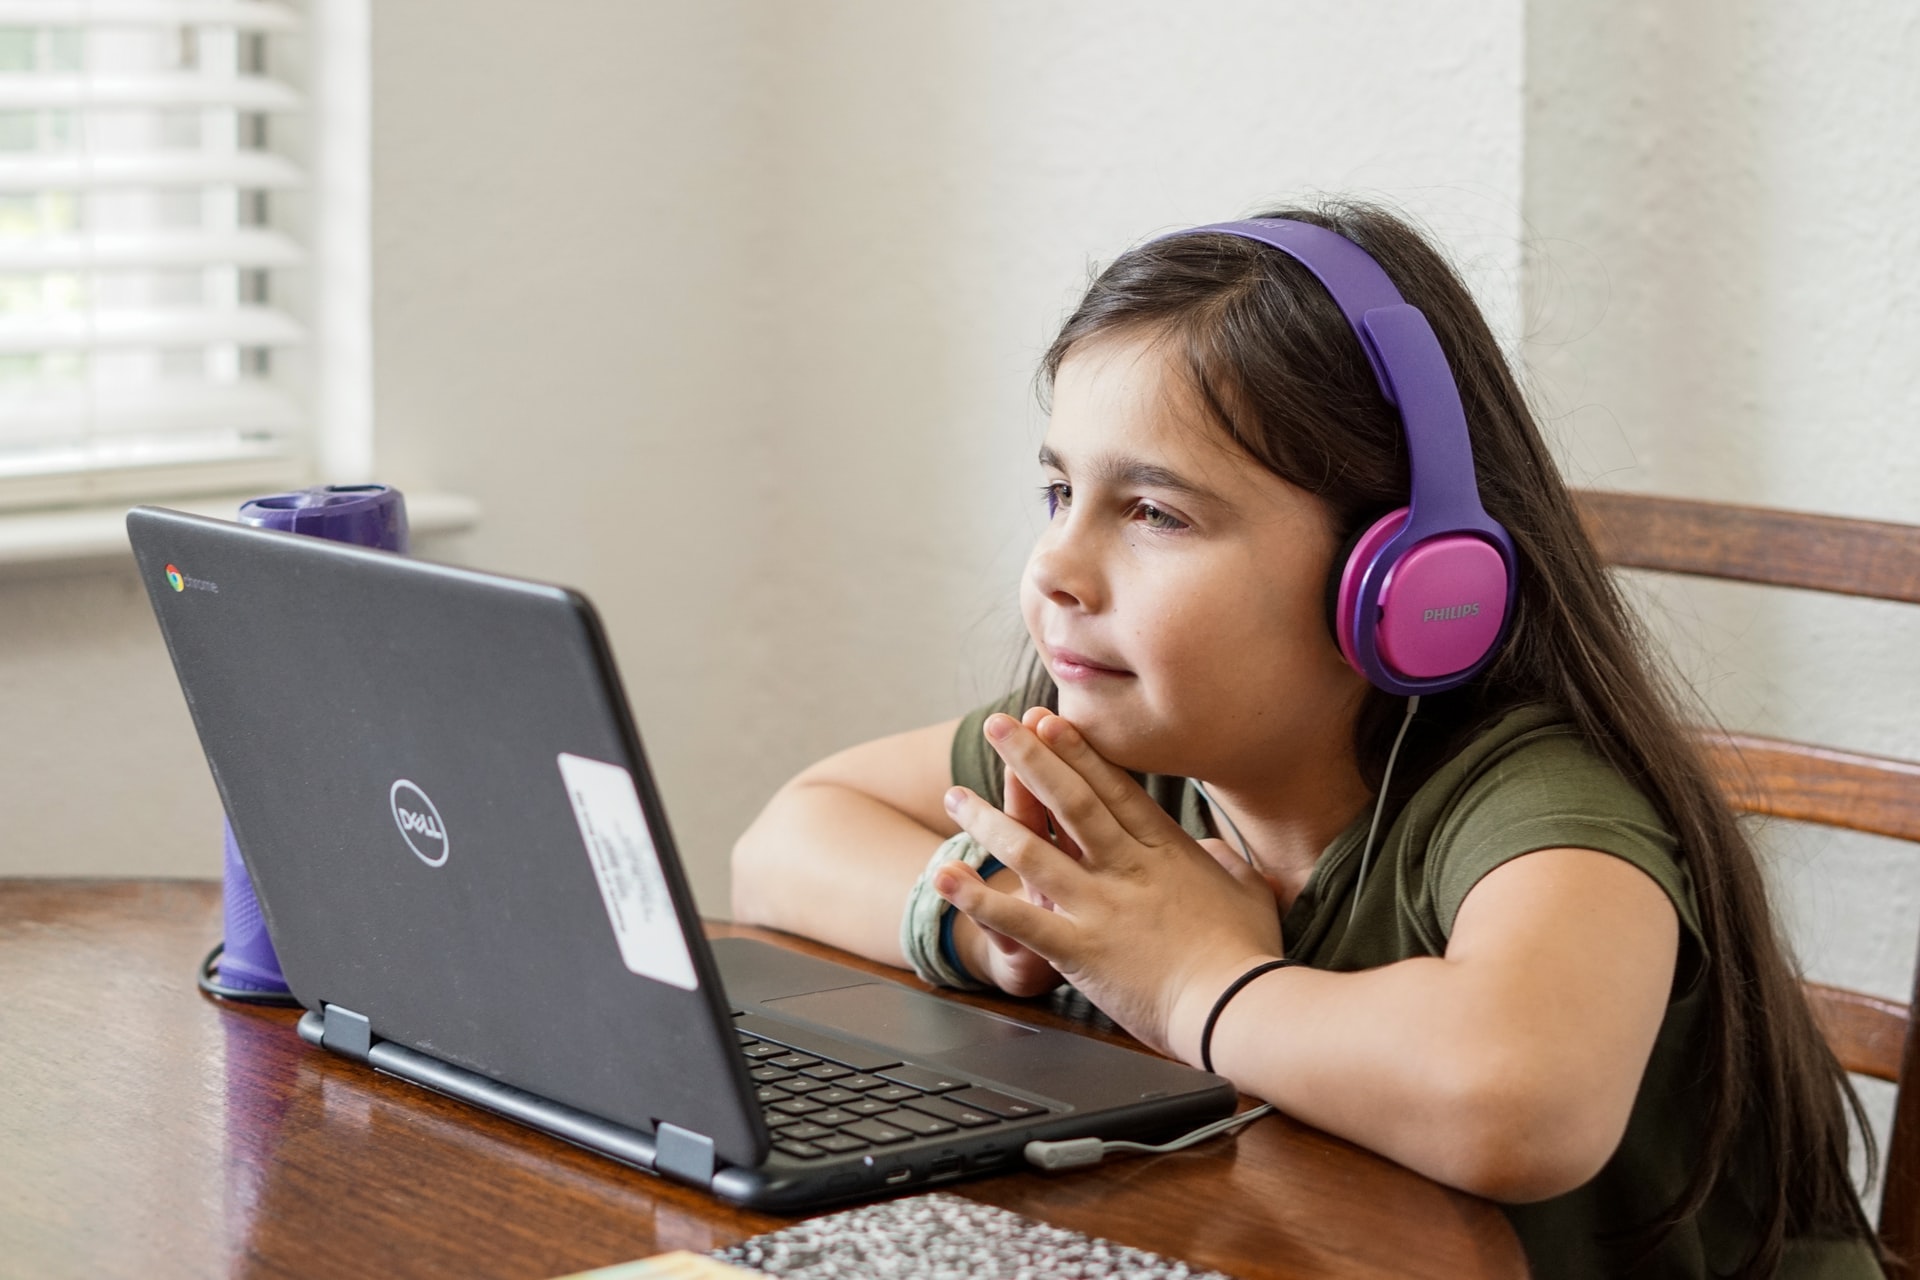 A female elementary student with a Philips headset and a Dell laptop attends an online class